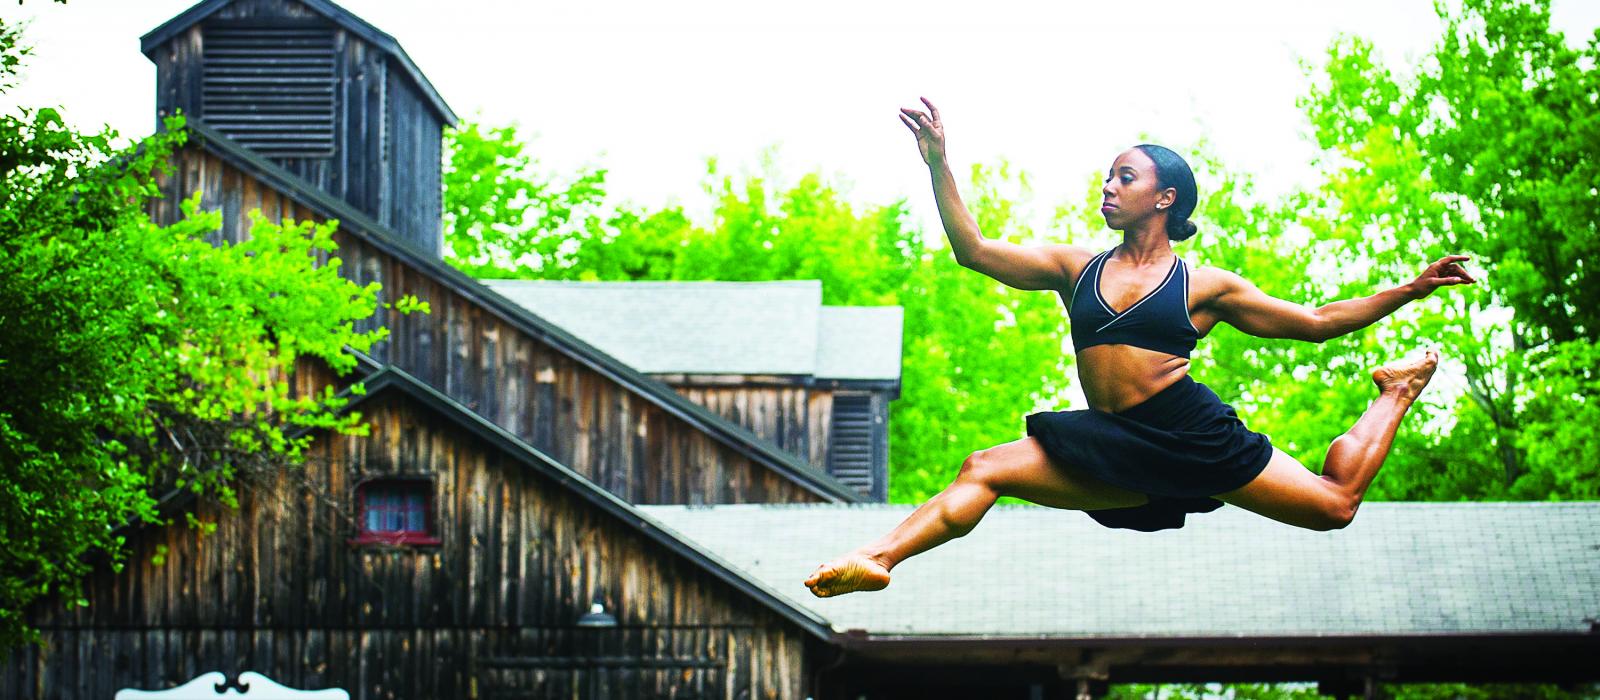 Woman leaping into air in front of barn.